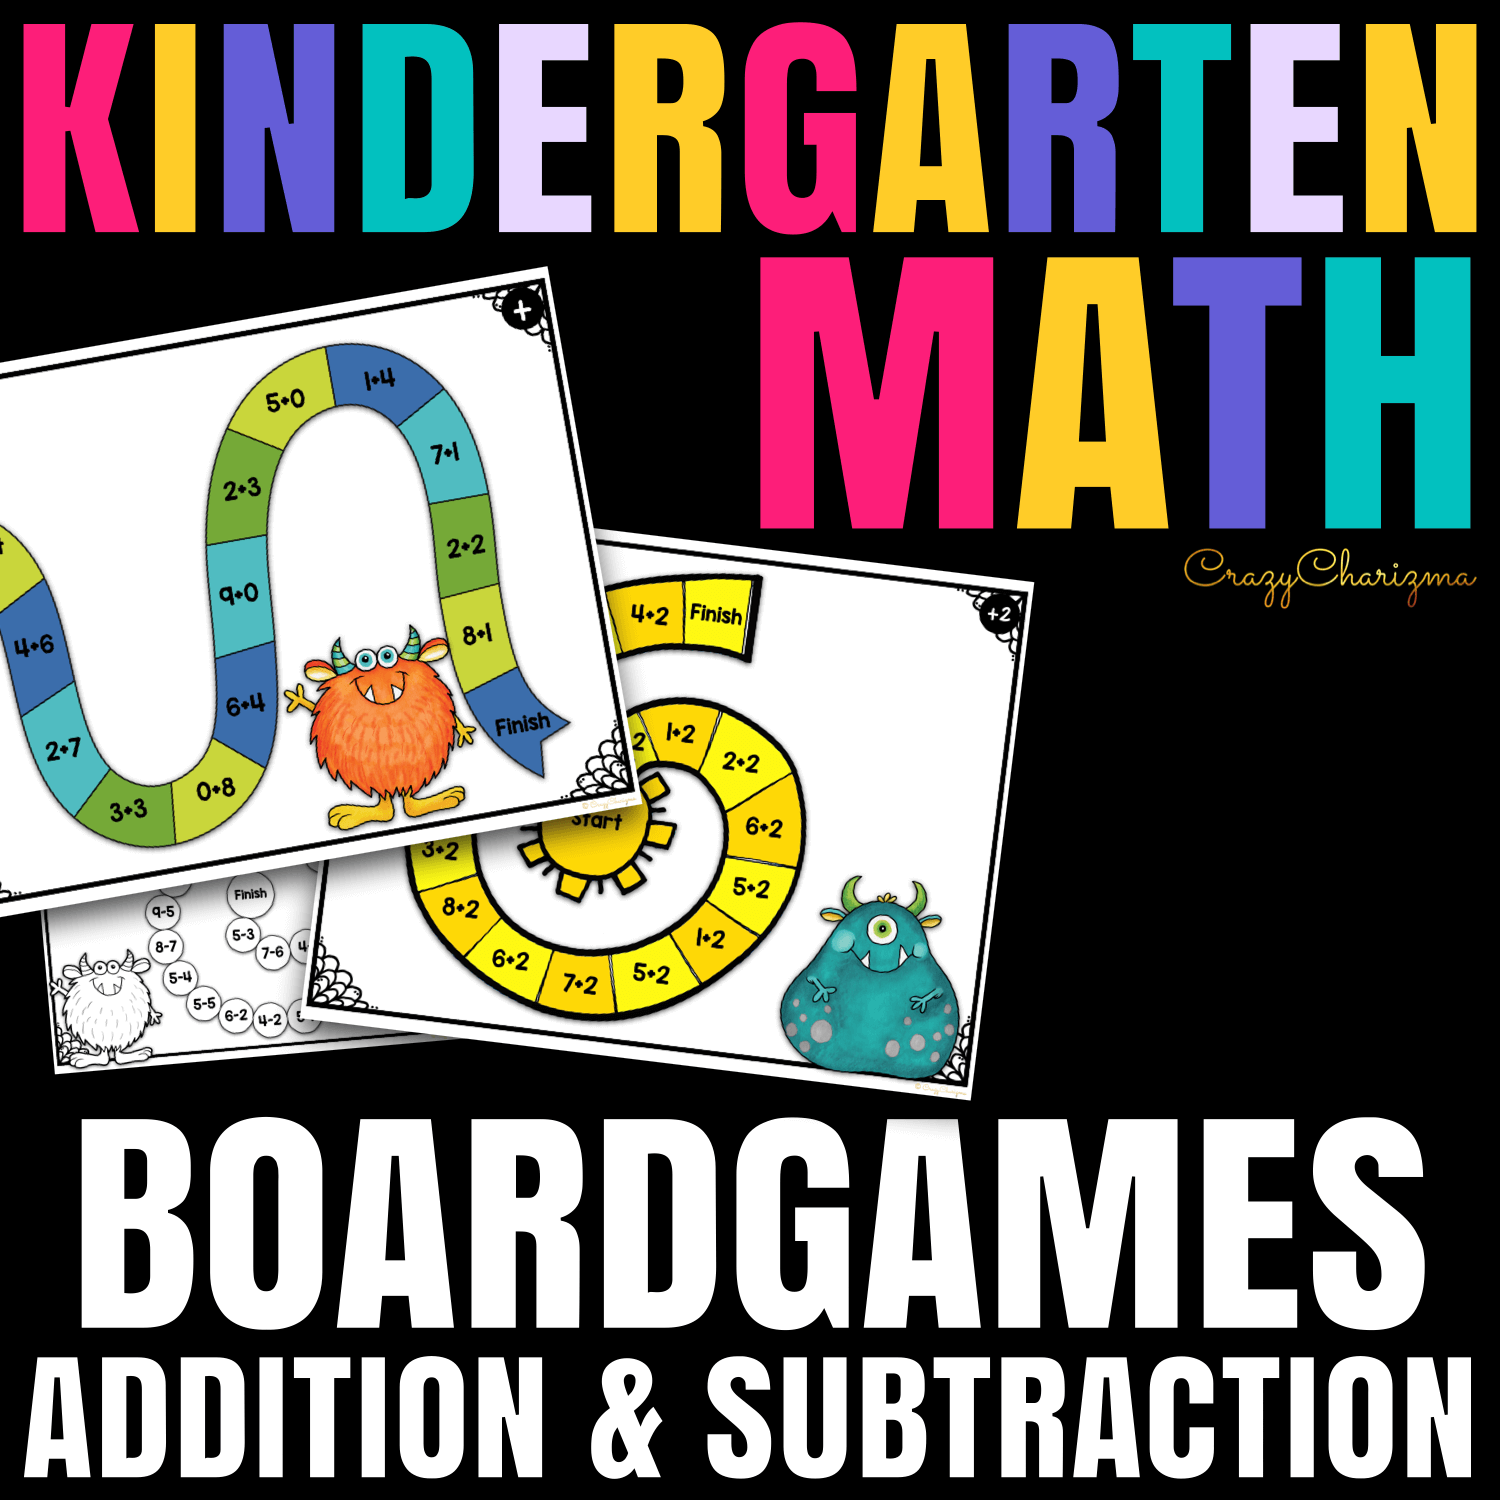 Practice addition and subtraction to 10 with these boardgames. Kids will practice in a fun way! A black and white version is also included!